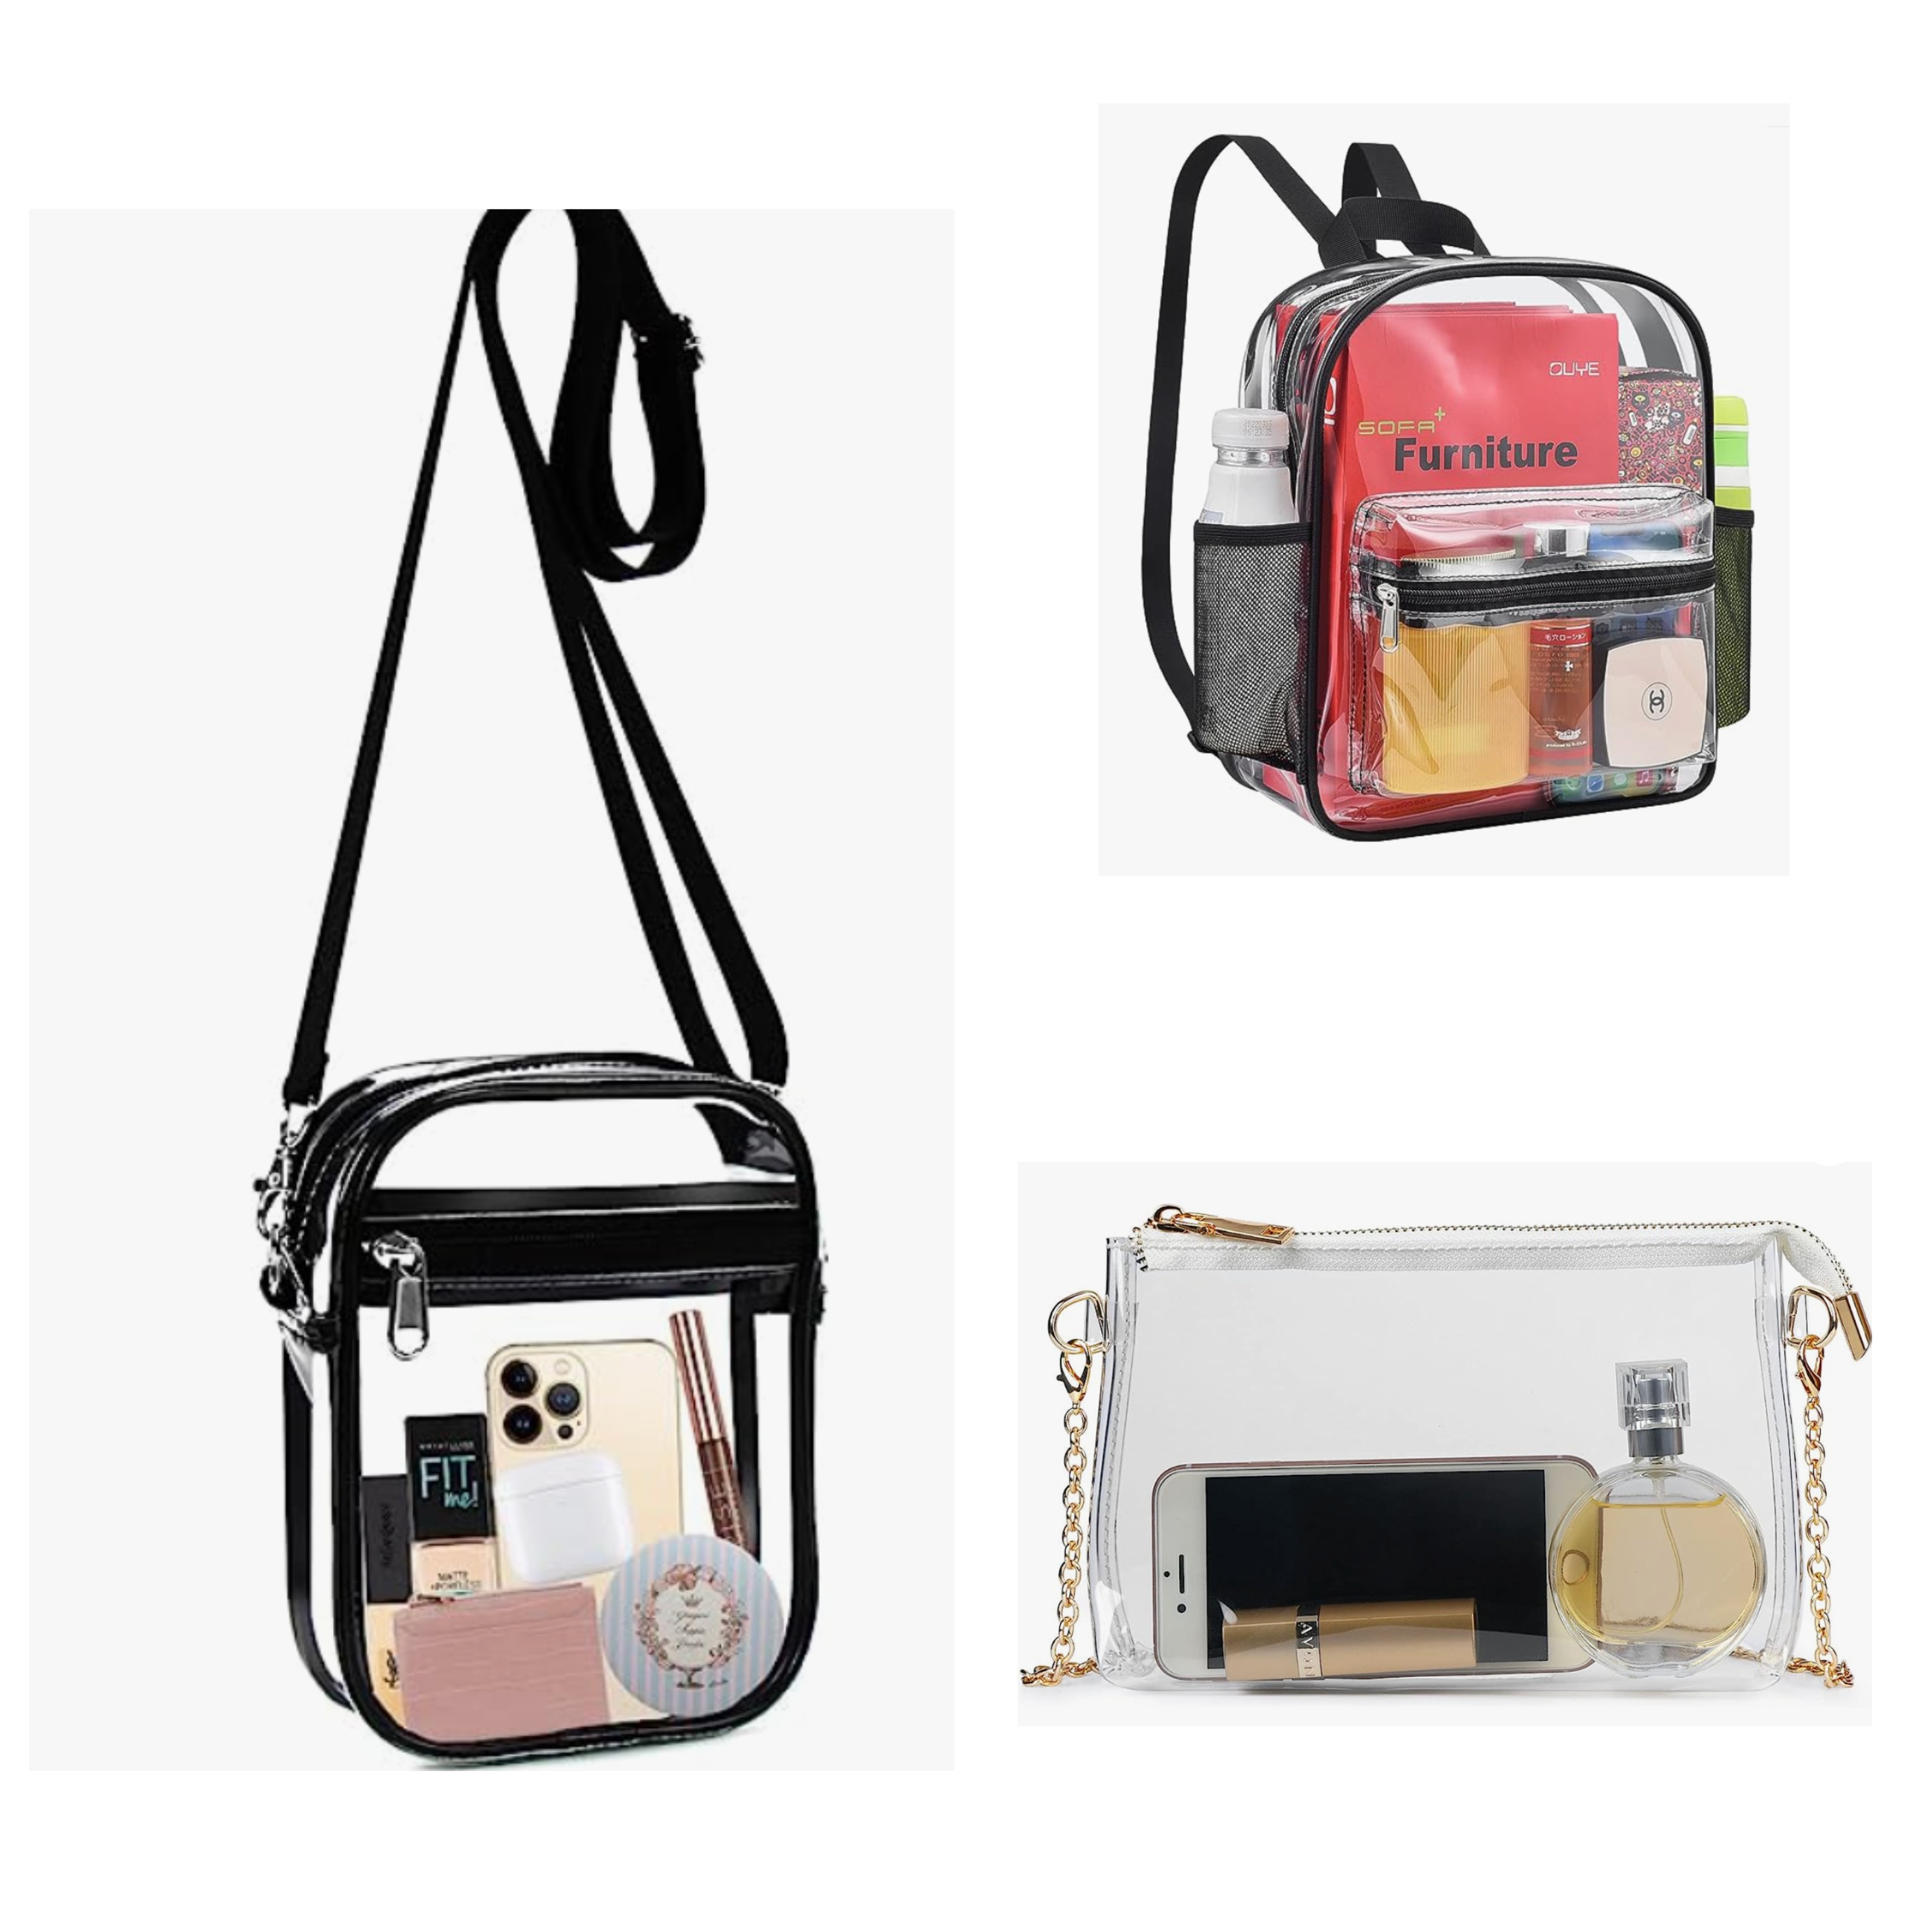 Shop 's best clear, stadium approved handbags for football games or  concerts this fall 